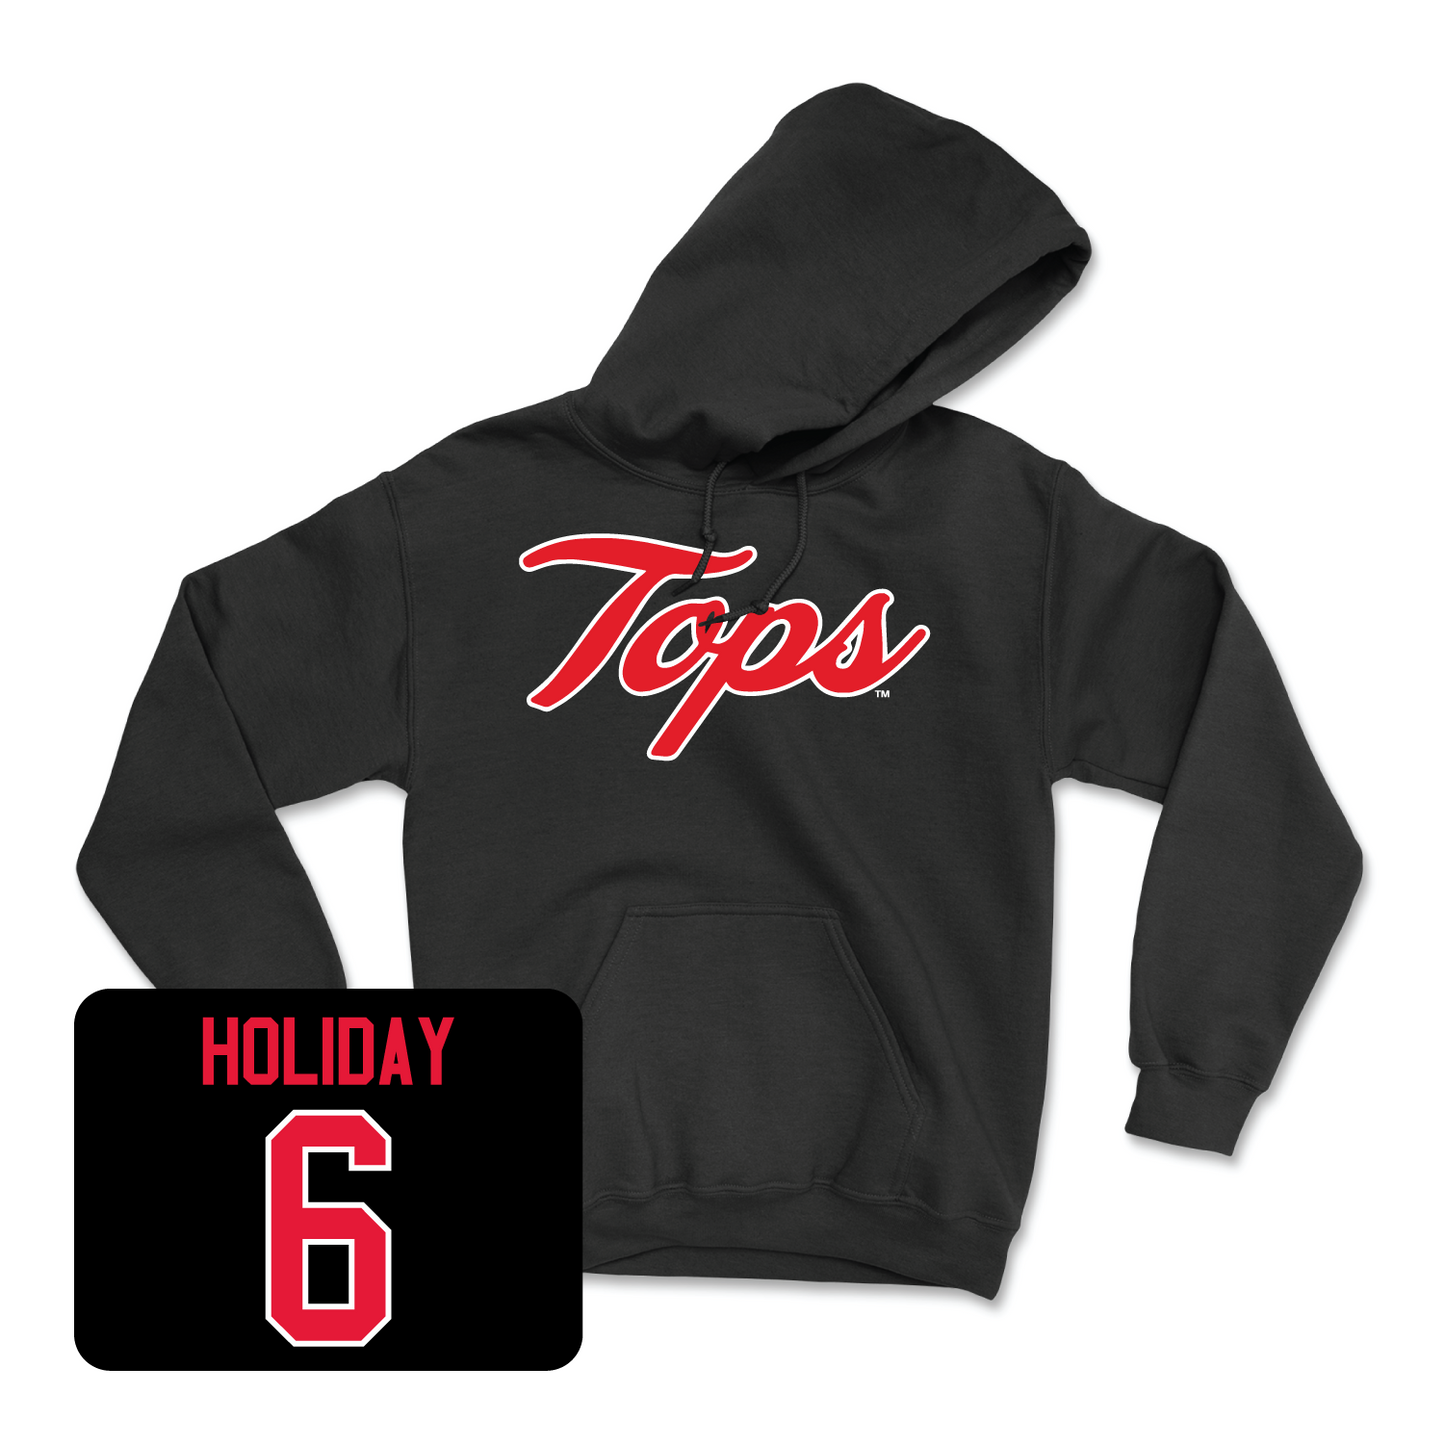 Black Football Tops Hoodie 3 Small / Jimmy Holiday | #6